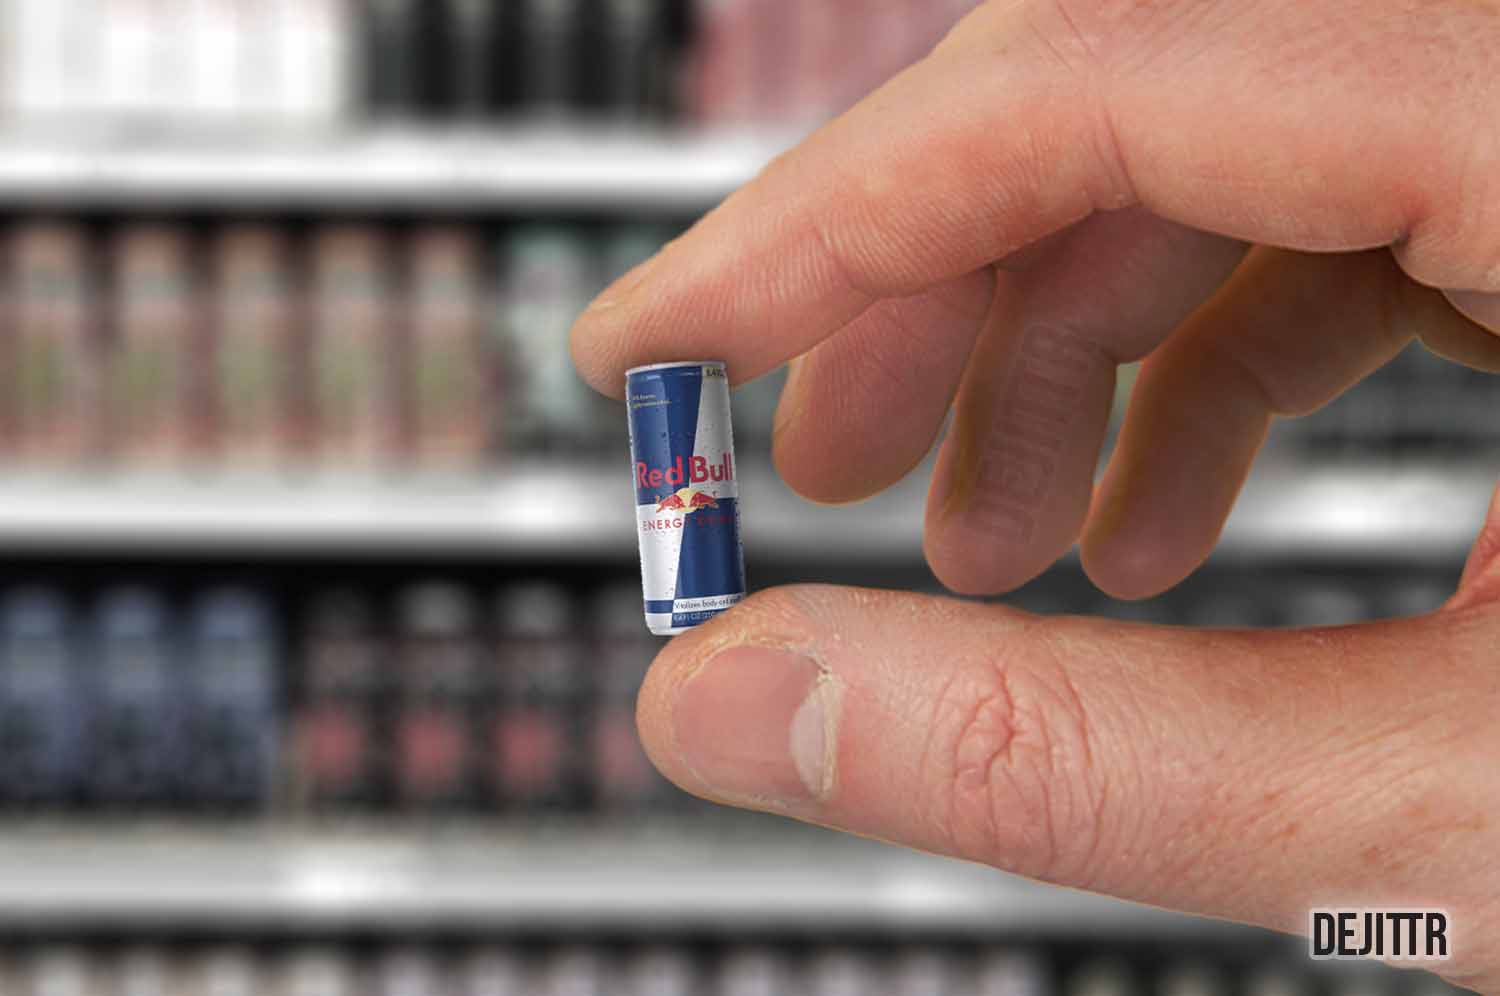 Someone holding a really small can of red bull in finger tips with blurred out shelf of energy drink in the background